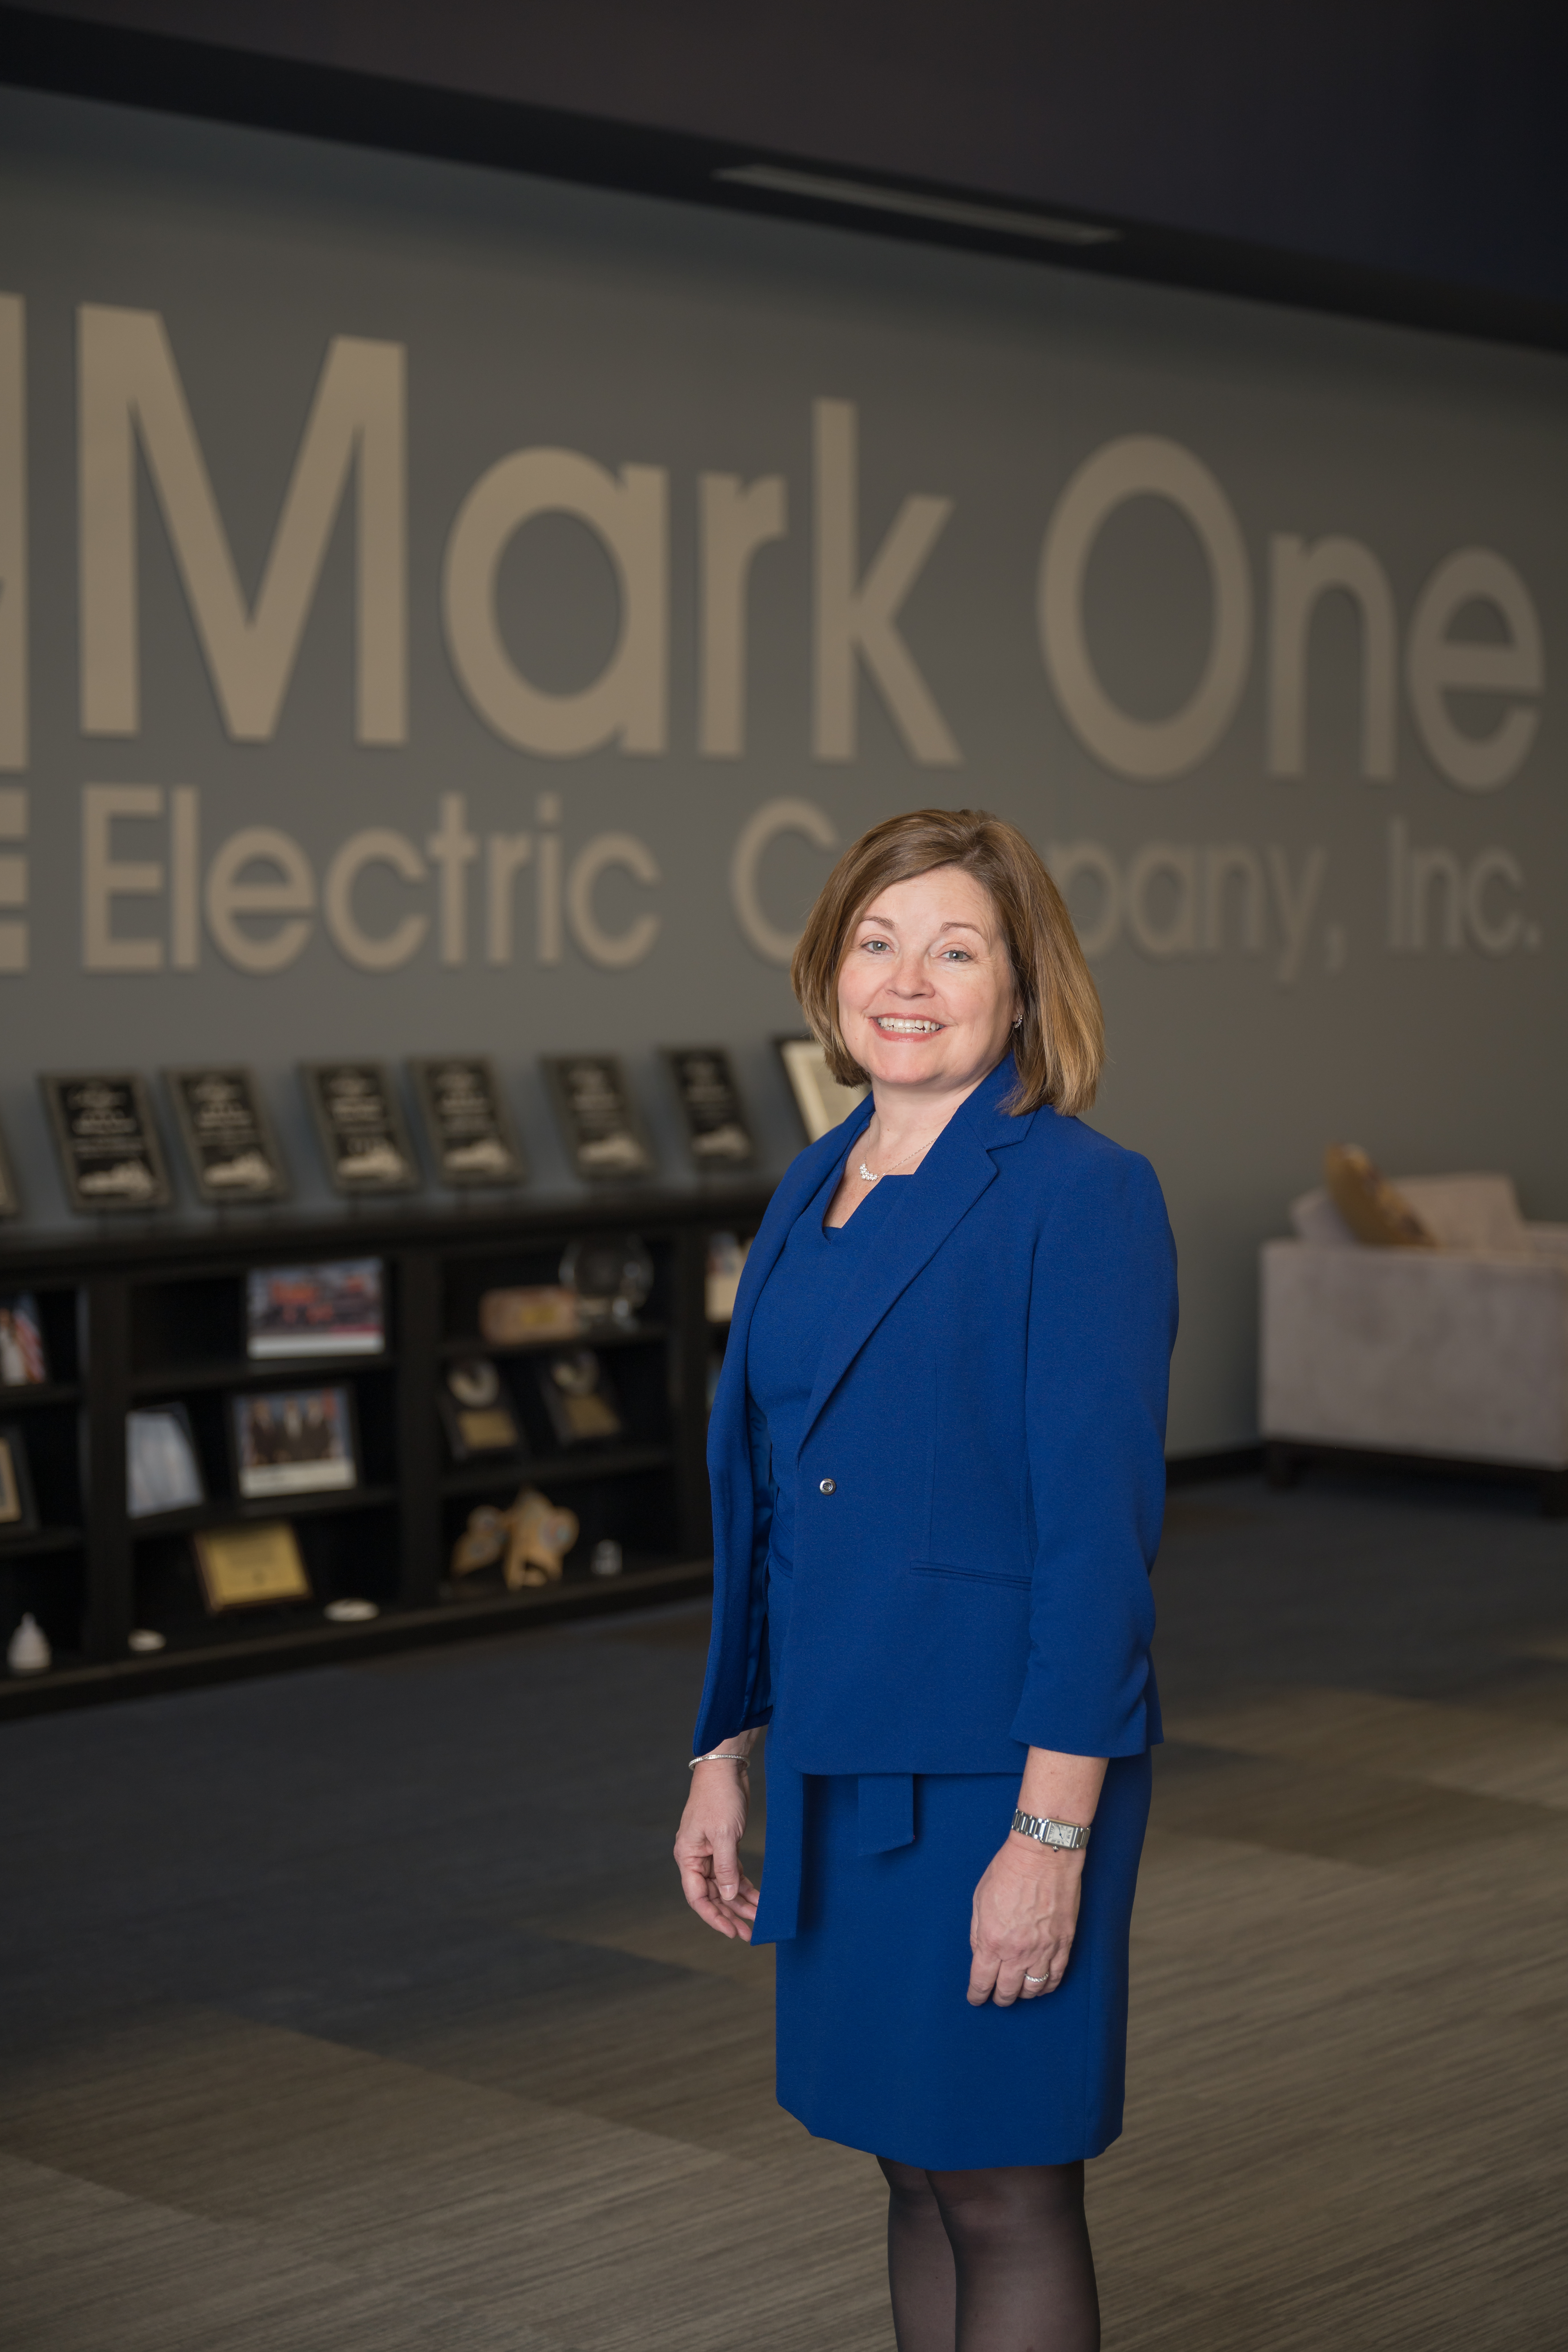 Angie McElhaney stands posing in the lobby of the Mark One Electric office